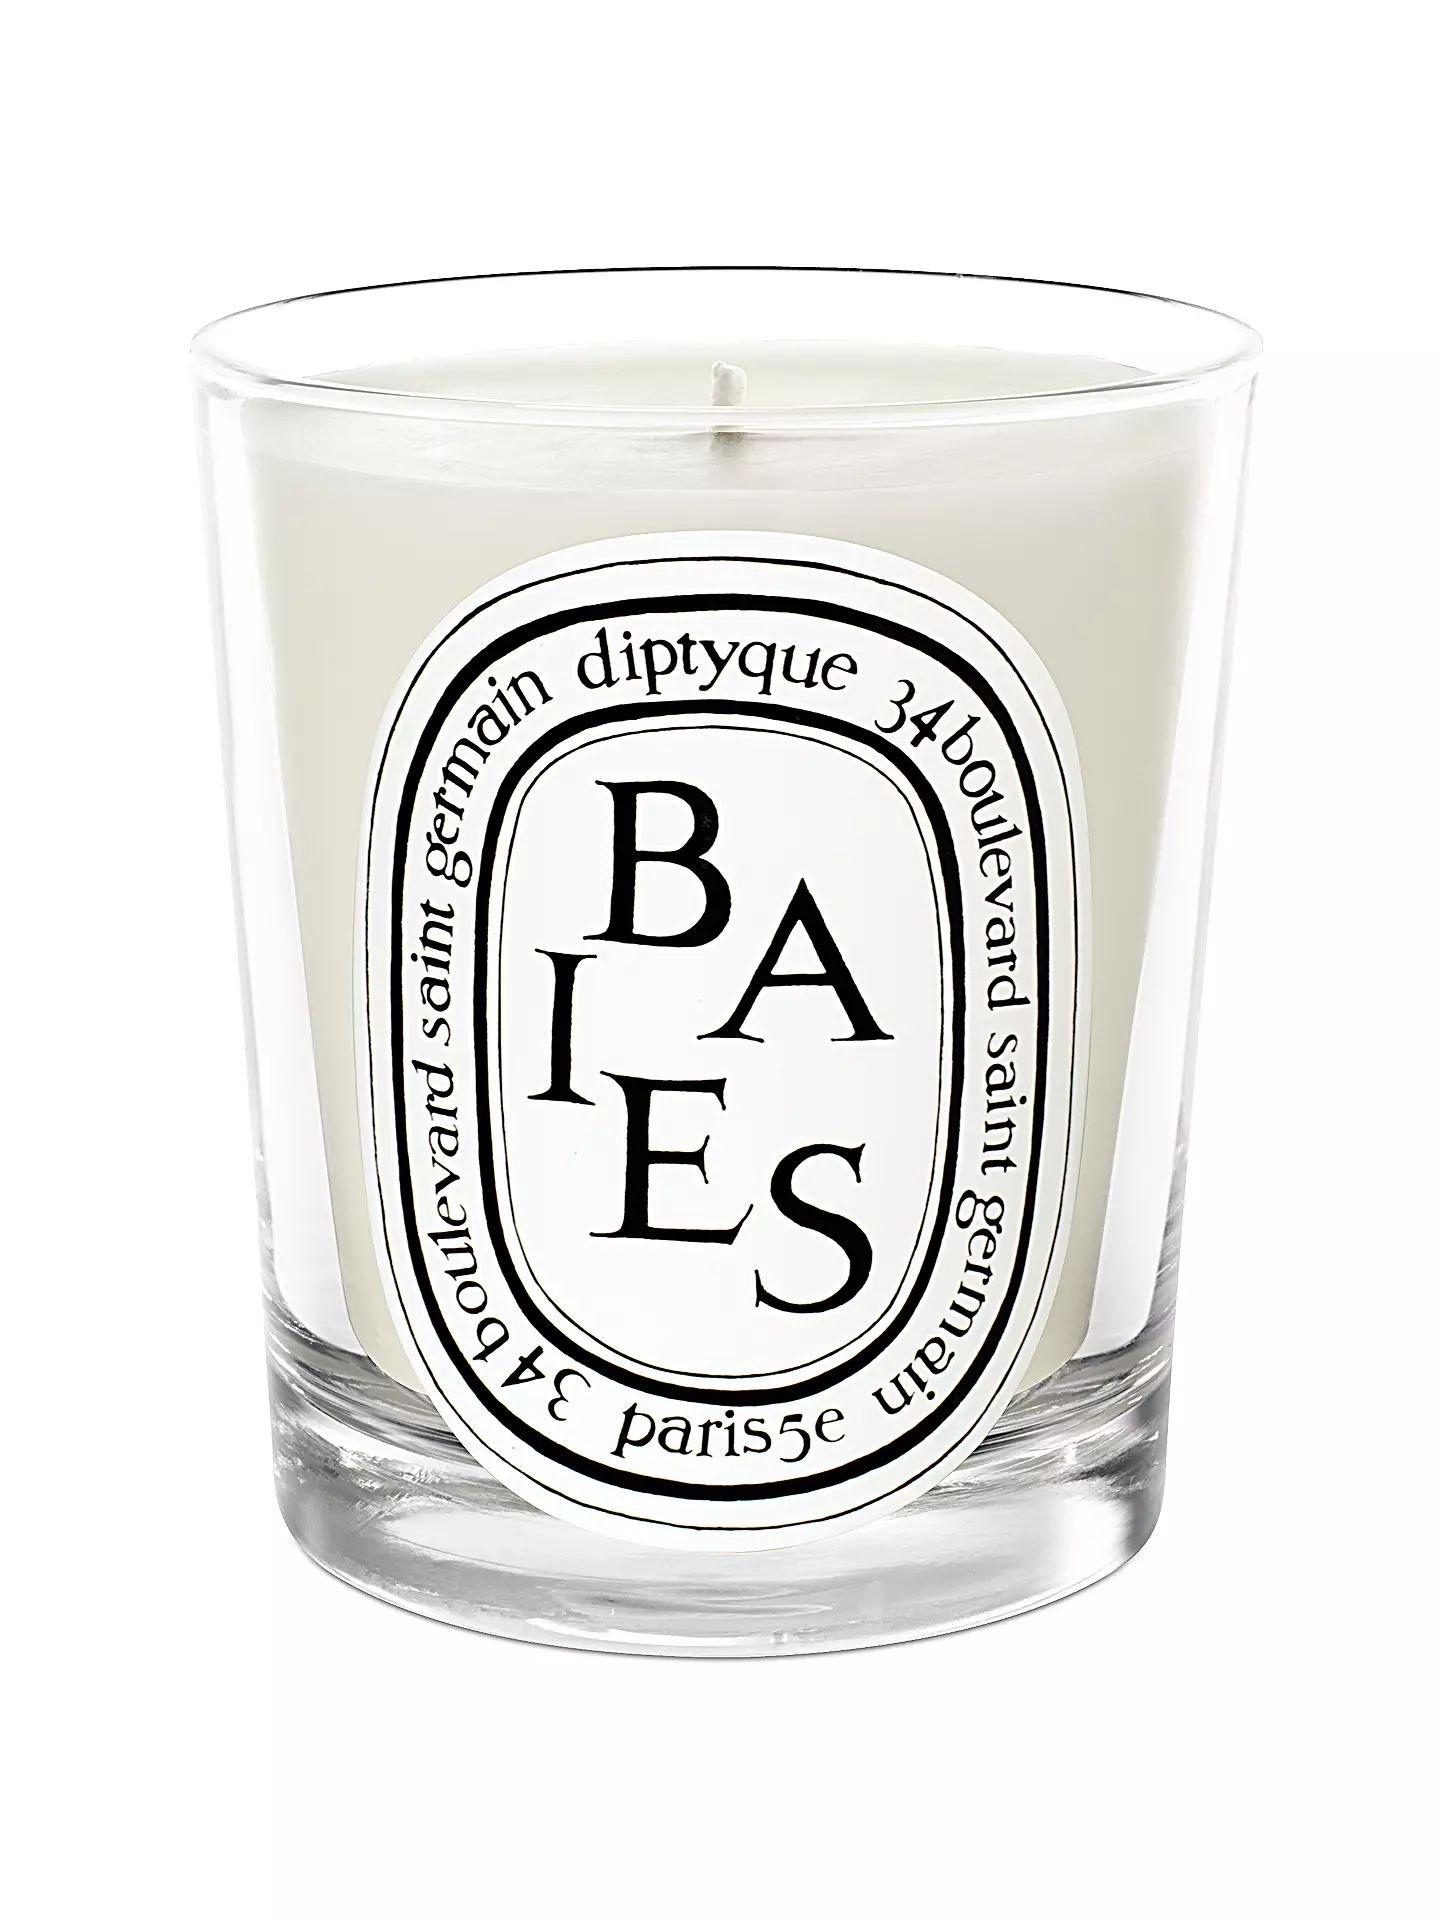 Diptyque Baies Scented Candle, 190g | John Lewis UK